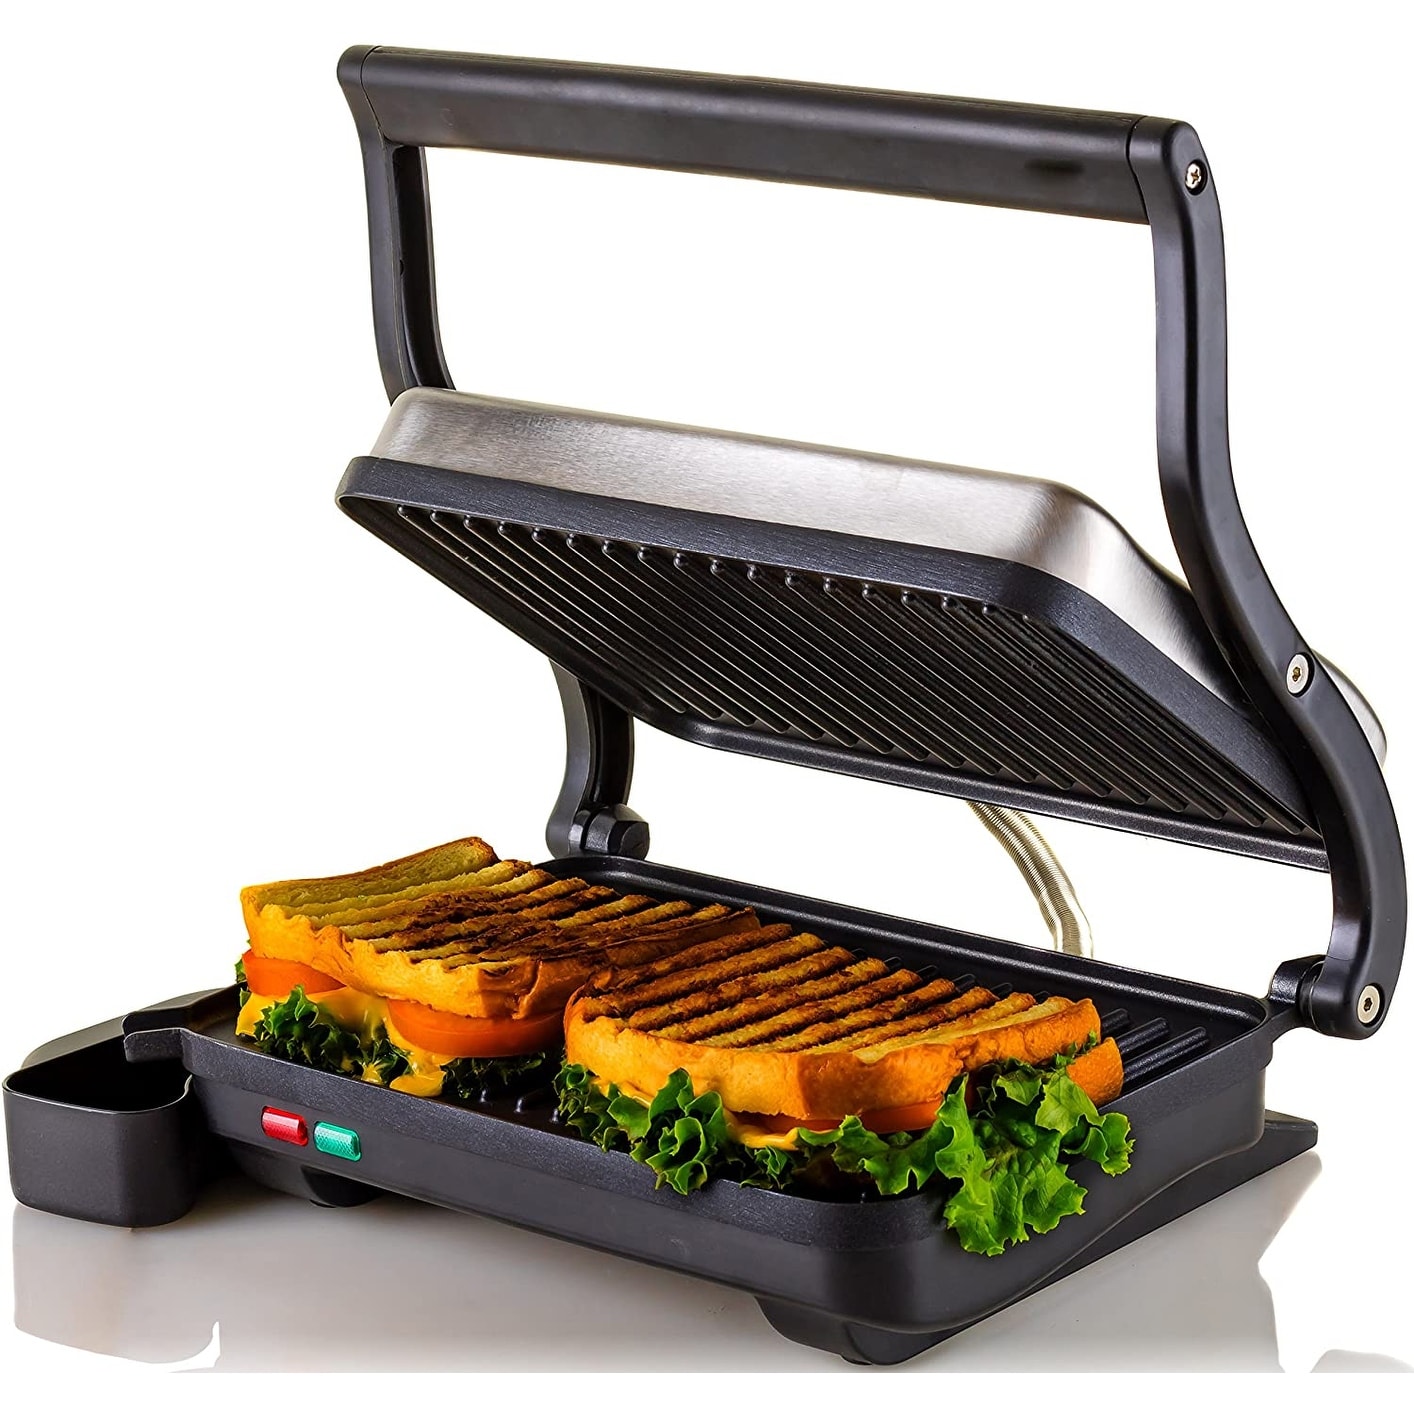 https://ak1.ostkcdn.com/images/products/is/images/direct/6a5132672a2e66b3f9ebda78d120ab8729530ad6/Ovente-Electric-Panini-Press-Grill-Sandwich-Maker-GP0620-Series.jpg